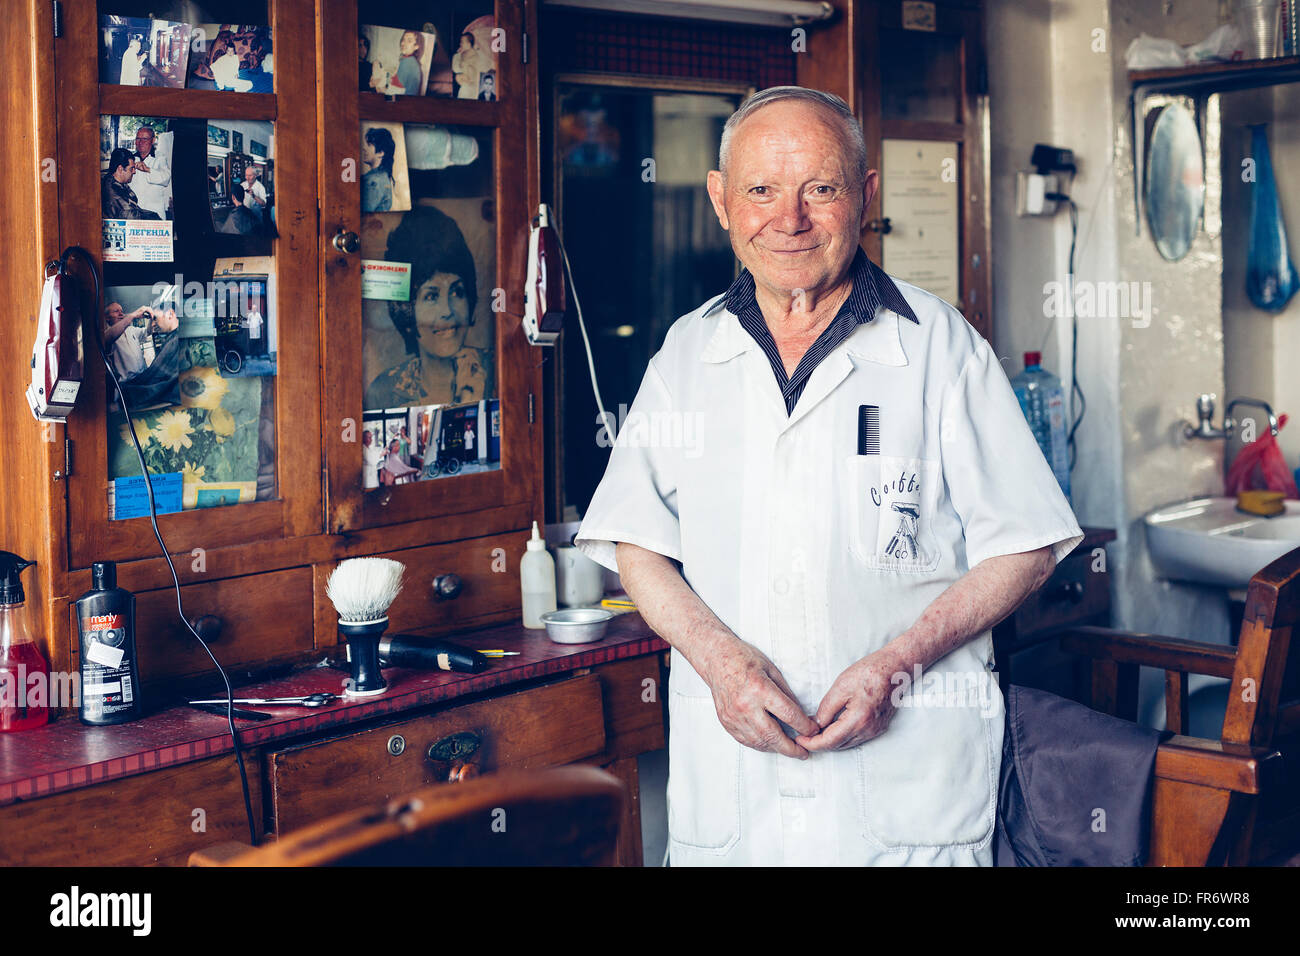 Republic of Macedonia, Bitola, the city center, portrait of a barber in barbershop Stock Photo